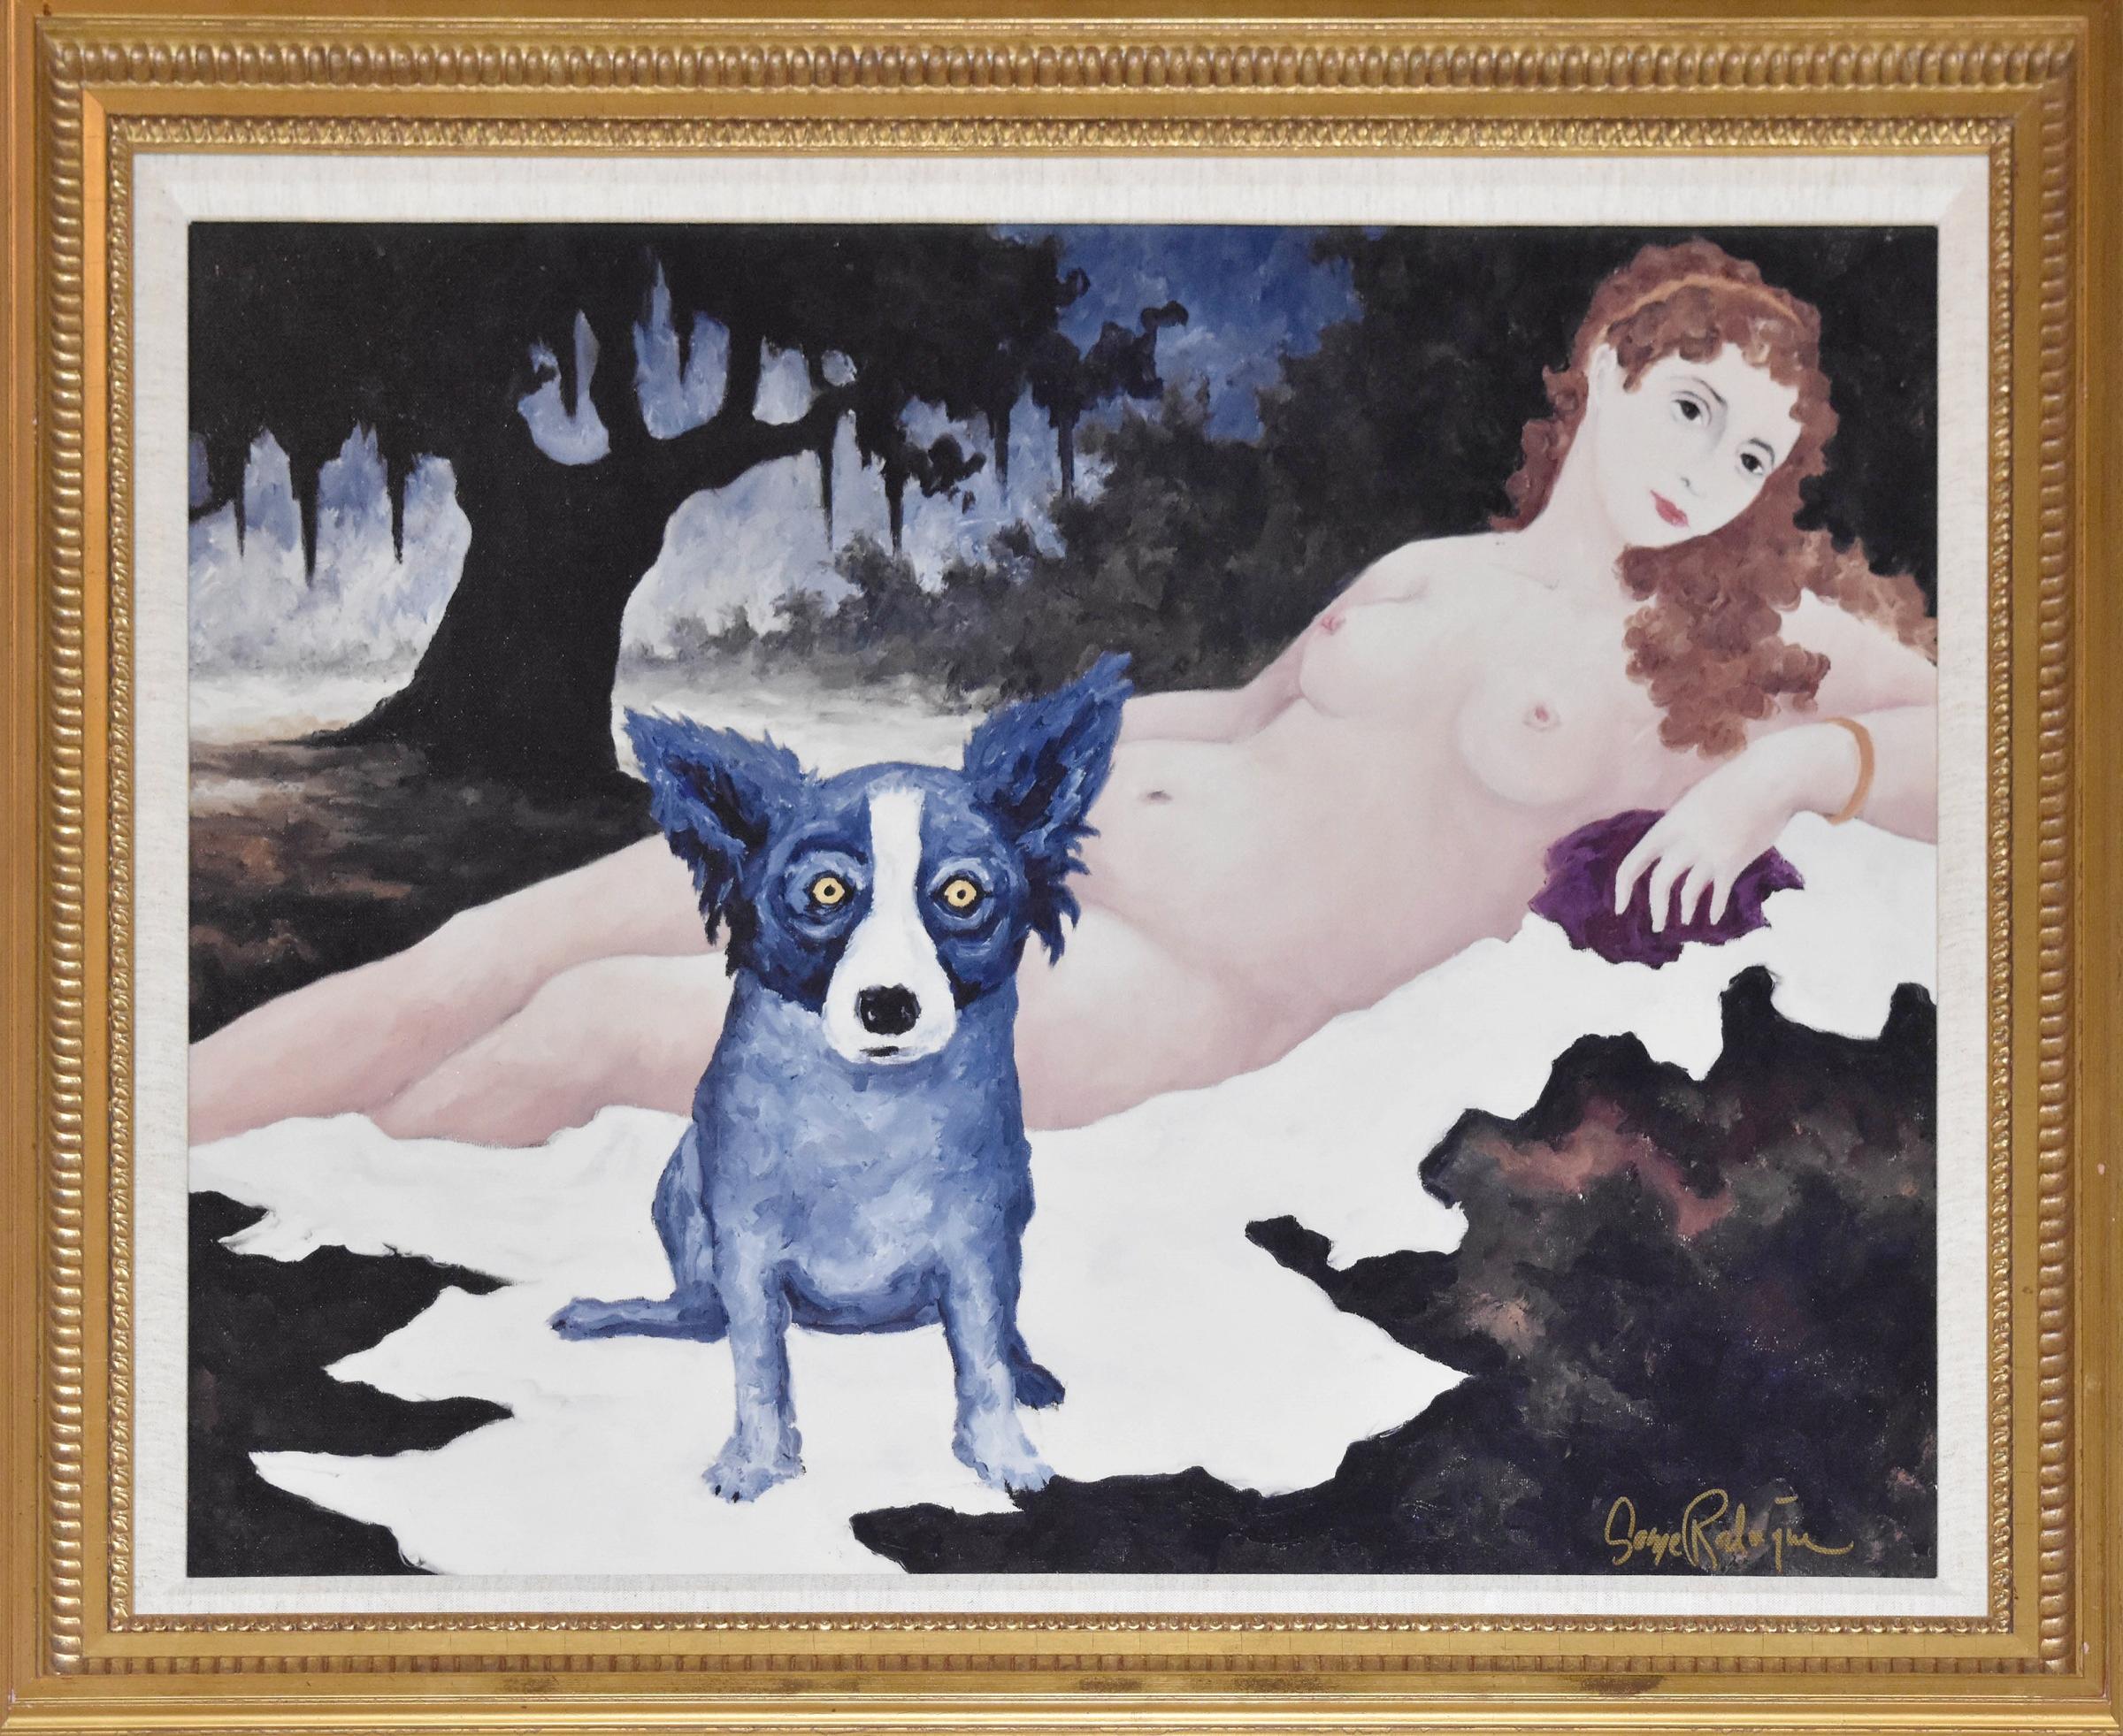 Wrong Century - Signed Giclee on Board Rare Blue Dog Print